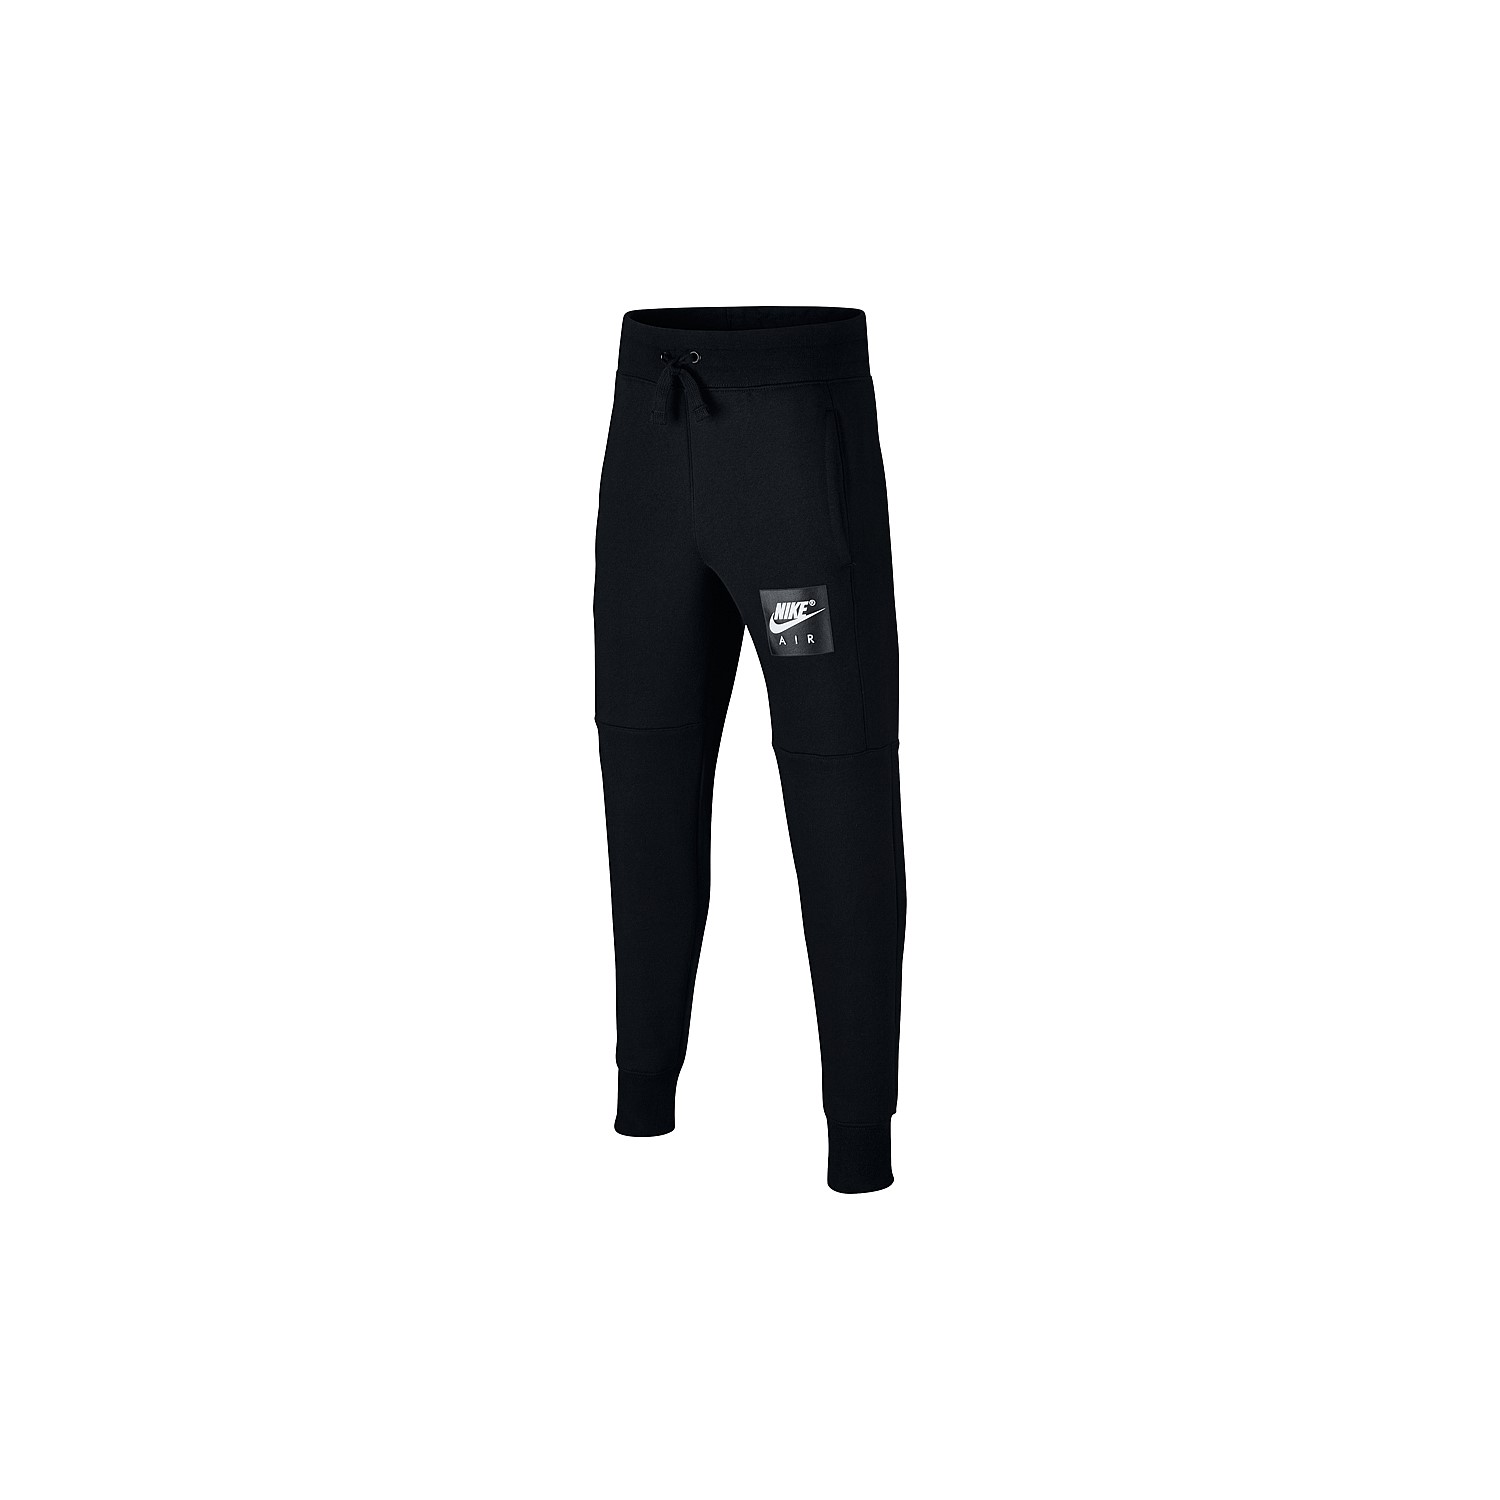 Stirling Sports - Boys Air Pants